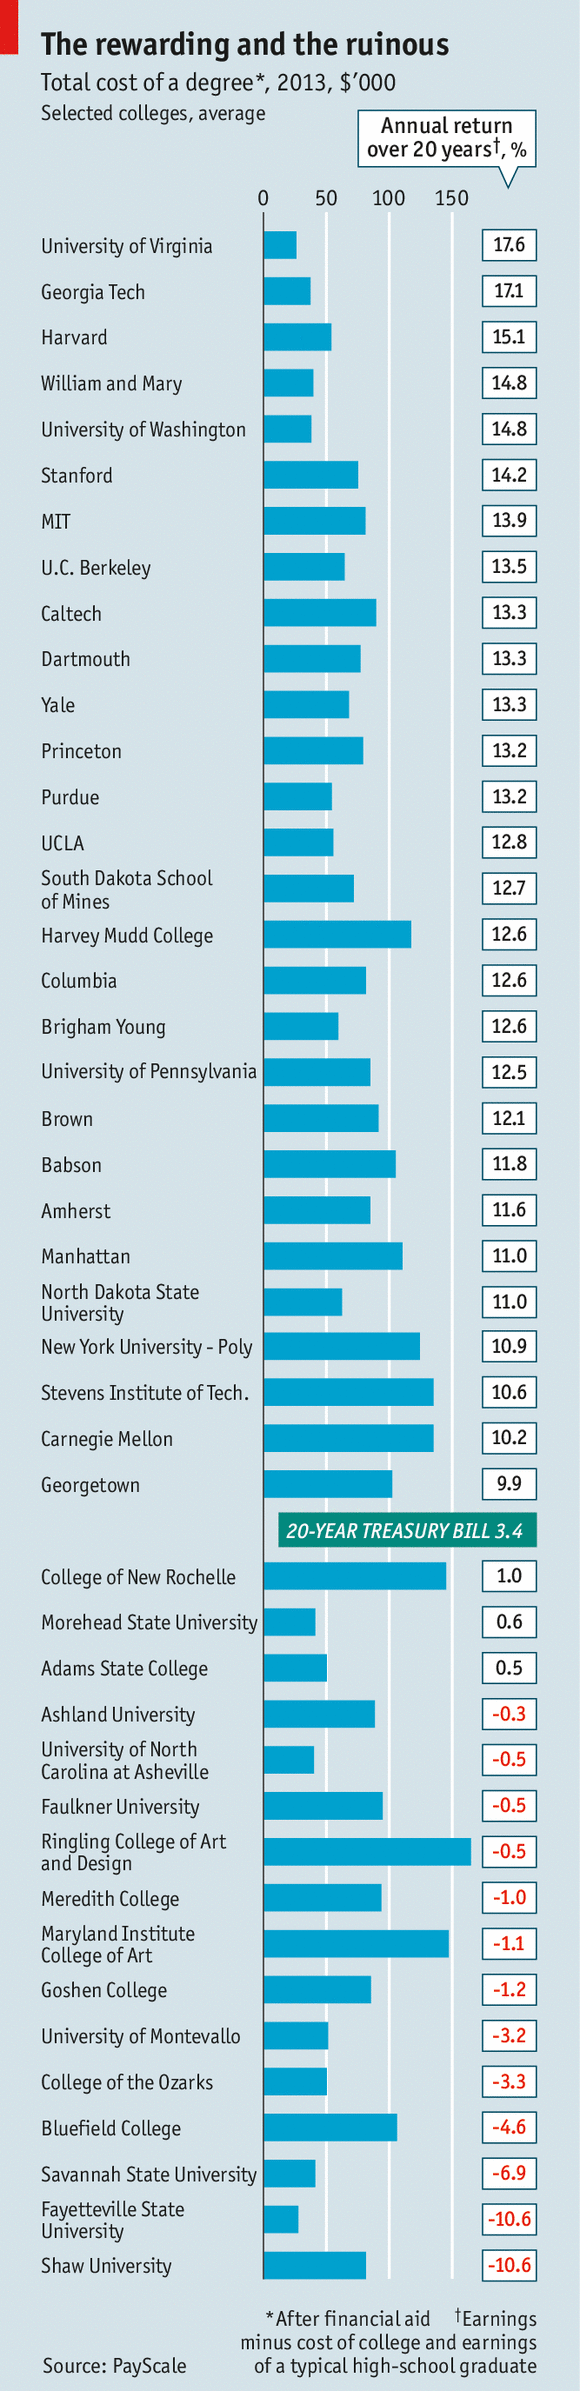 Is college worth the cost debate over